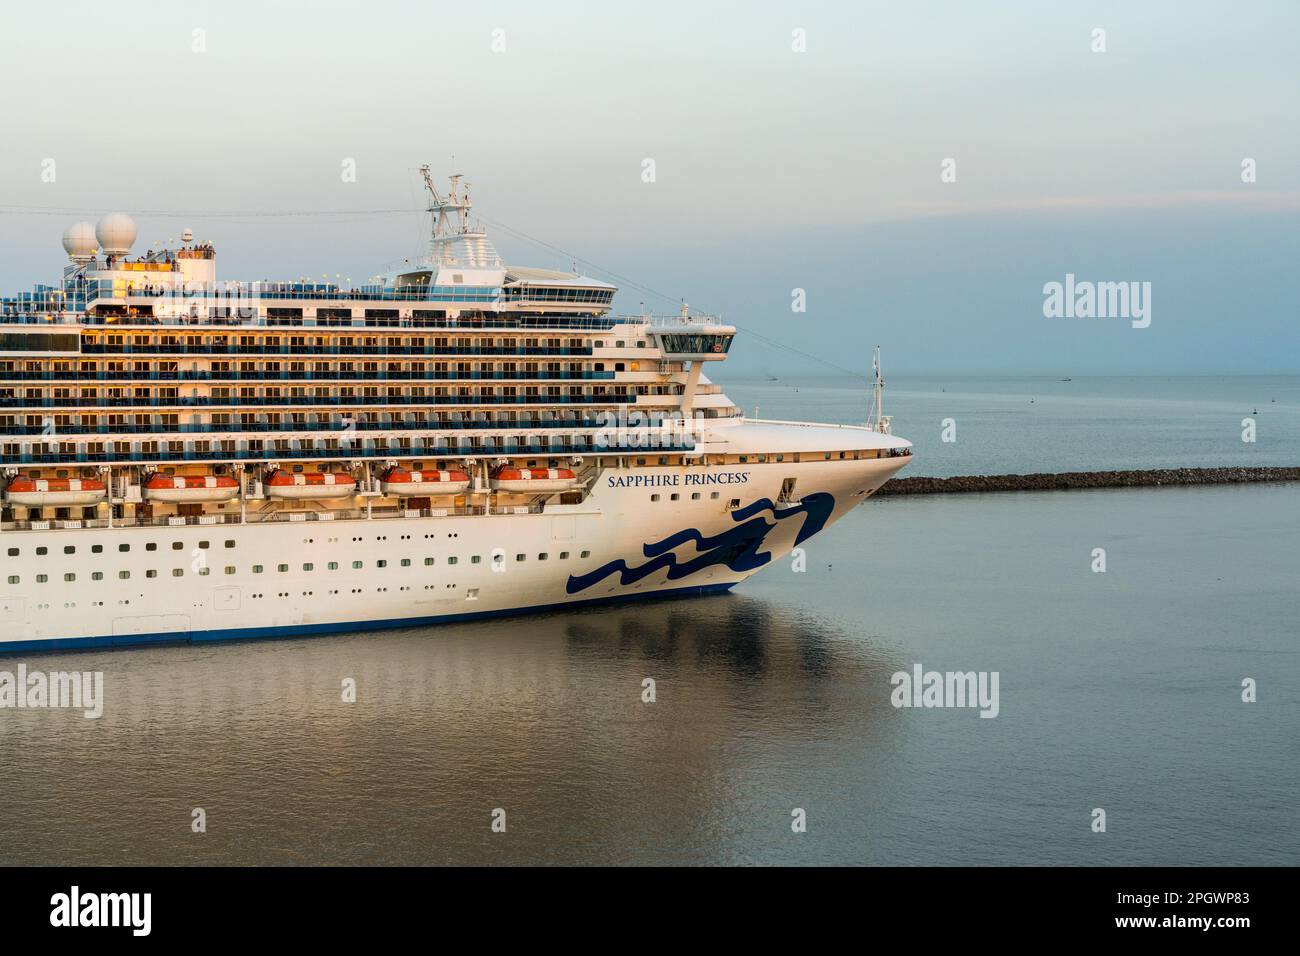 Buenos Aires, Argentina - 6 February 2023: Sapphire Princess cruise ship leaving port in the early evening Stock Photo